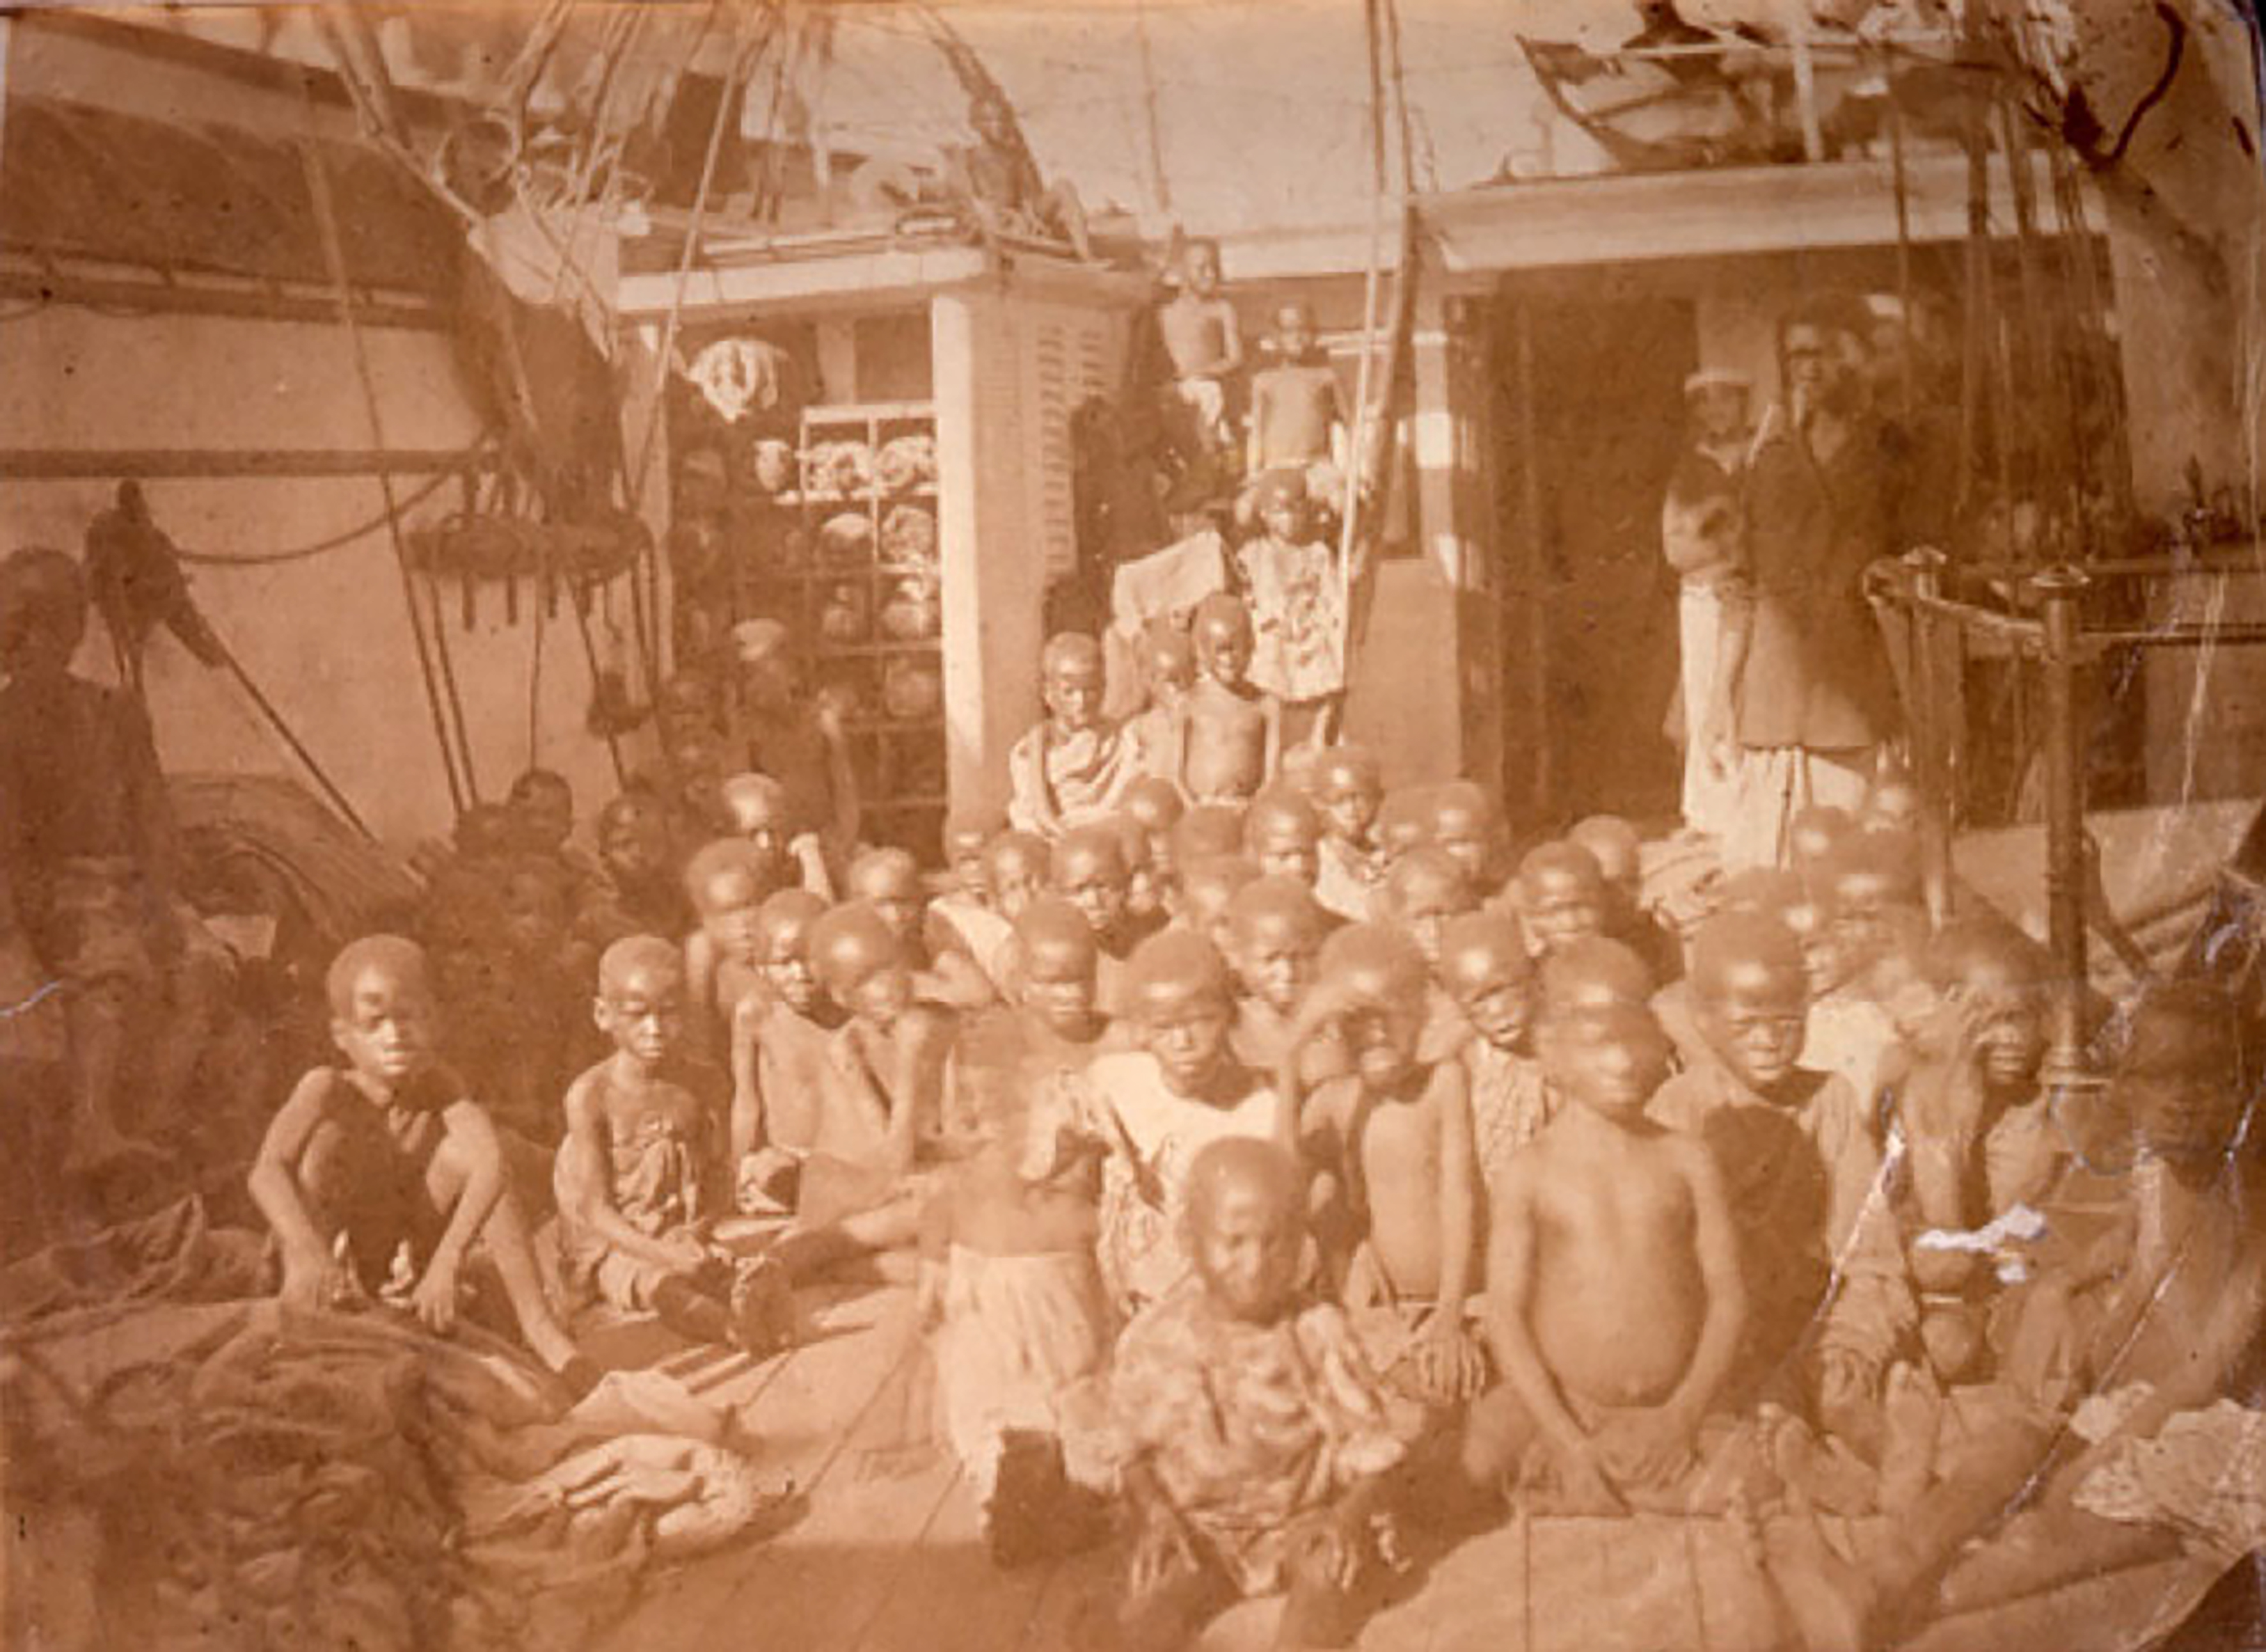 The British Navy's Daphne captured at least thirteen dhows amounting to over 650 "Liberated Africans" in 1868. This photograph shows children sitting on the deck of the Daphne after being seized from the dhows. Having left Zanzibar, they were captured in the Indian Ocean and taken to the Seychelles where they were indentured. Source: The National Archives, UK, FO 84/1310, 1869, f. 193-195.